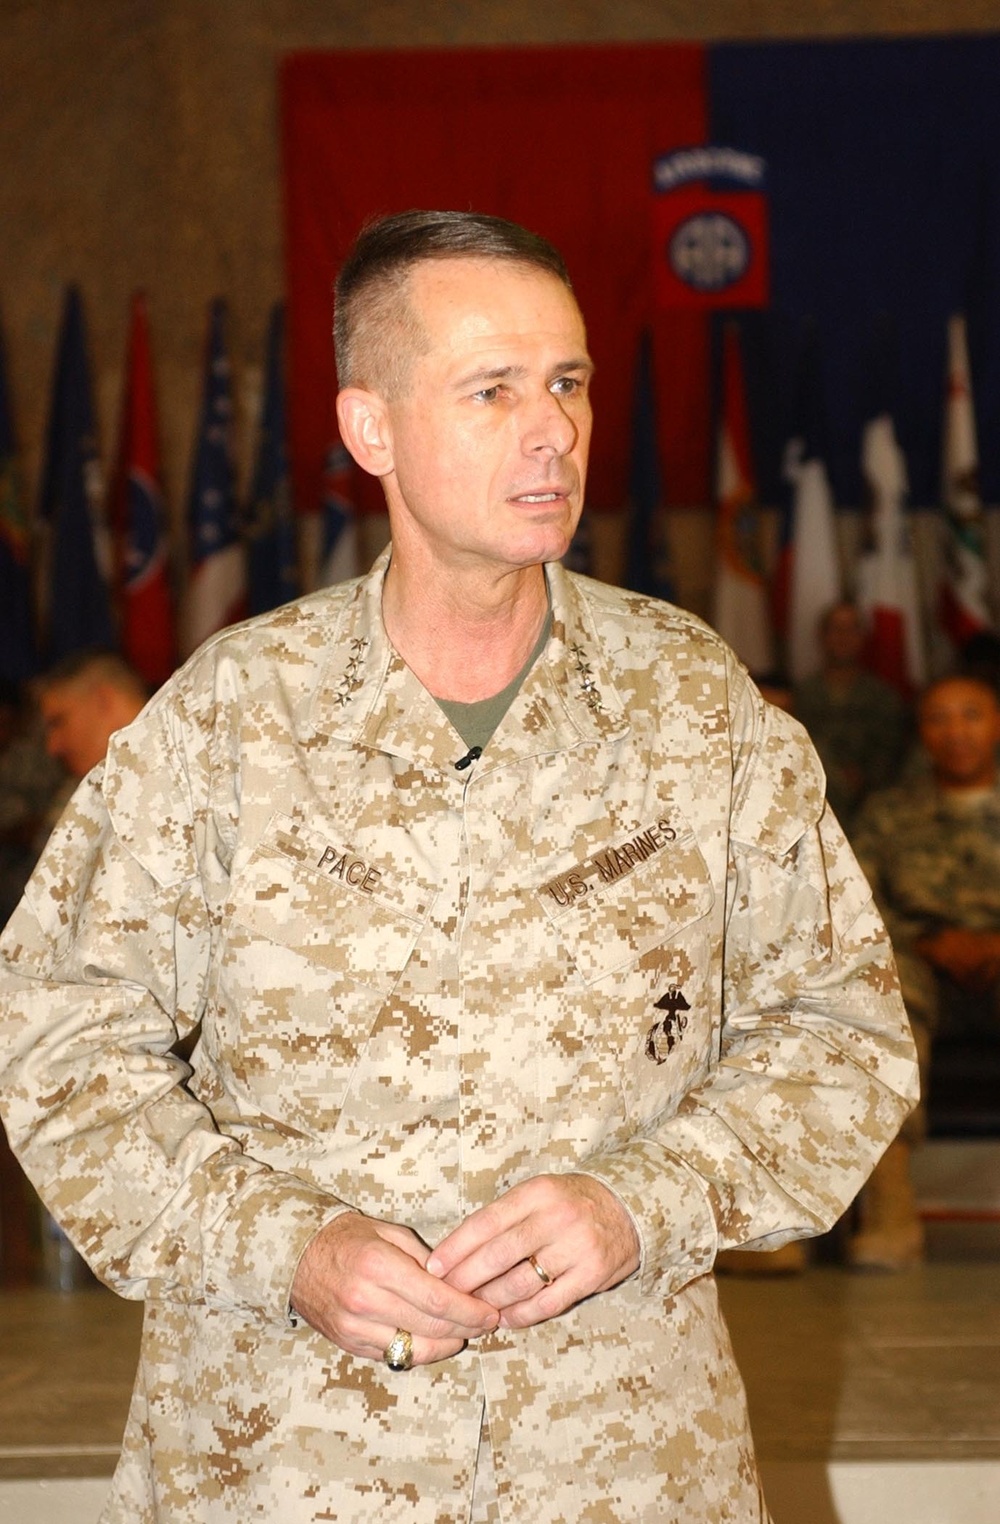 Chairman of Joint Chiefs Visits Service Members